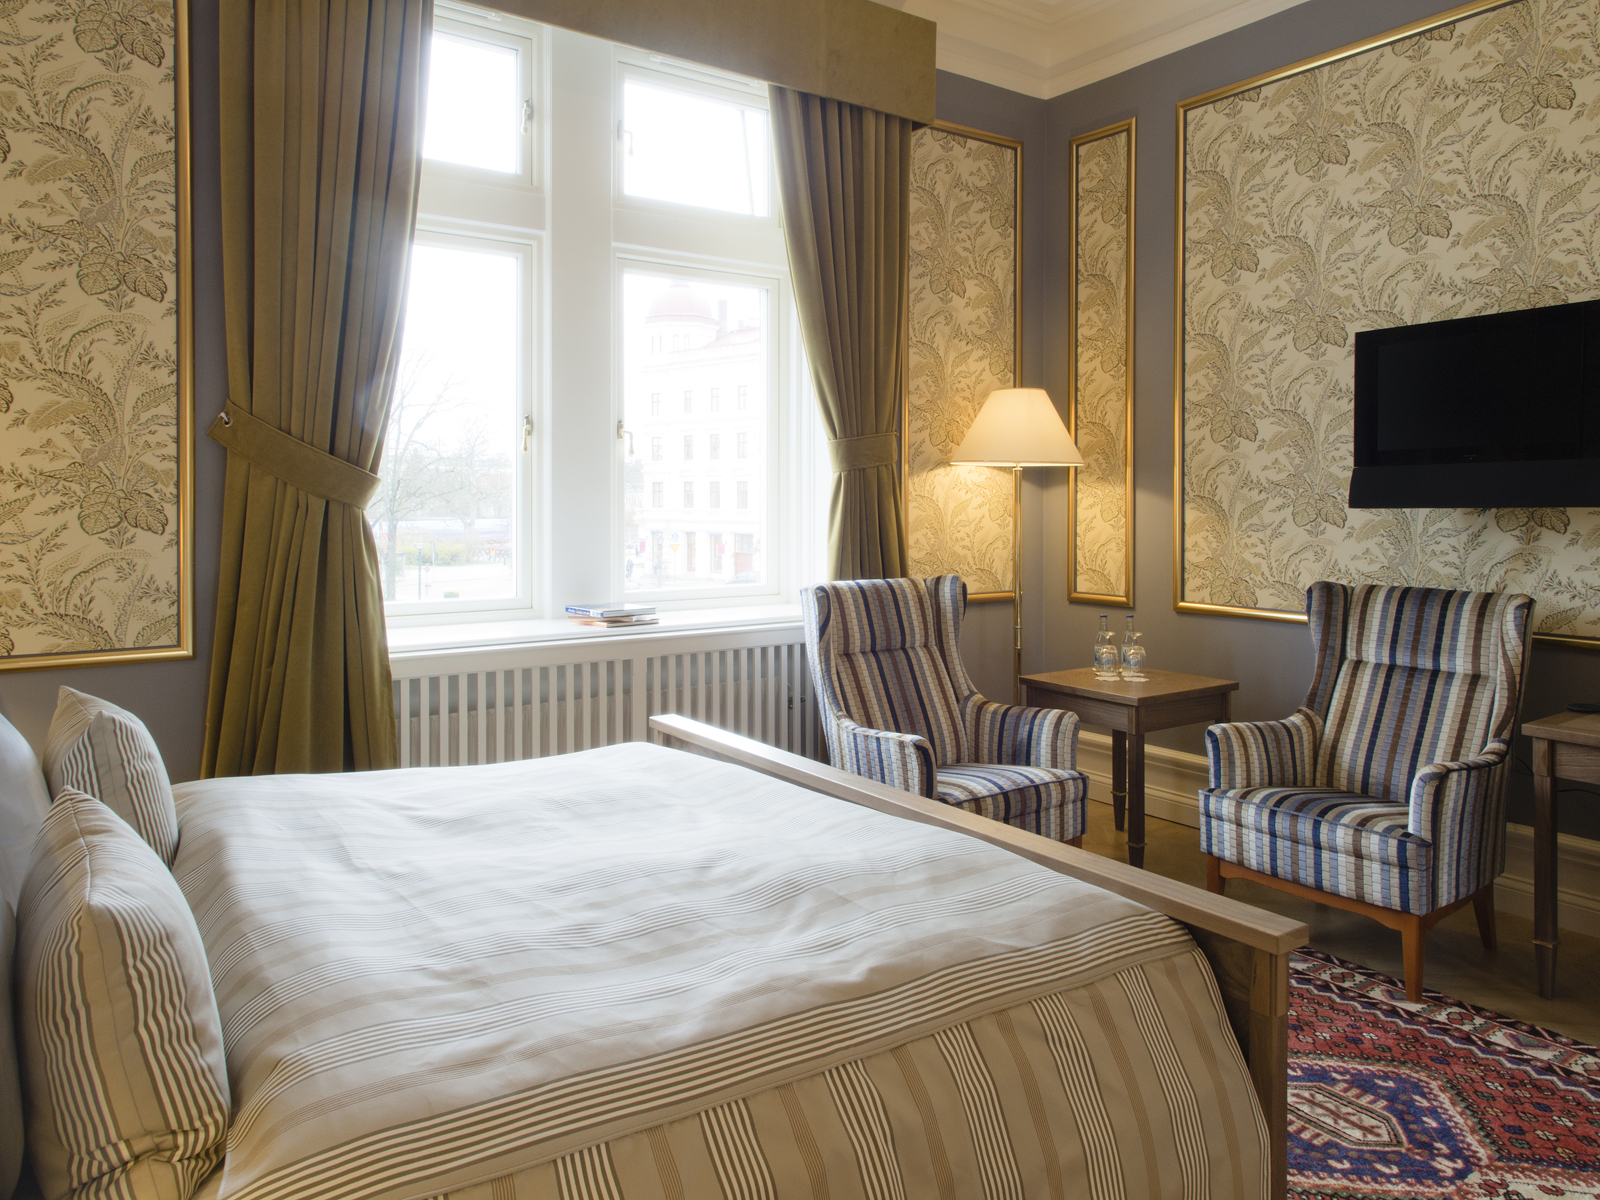 Grand Hotel Lund <br/>155.24 ew <br/> <a href='http://vakantieoplossing.nl/outpage/?id=49365de12acb26d8f316d9531352bd39' target='_blank'>View Details</a>